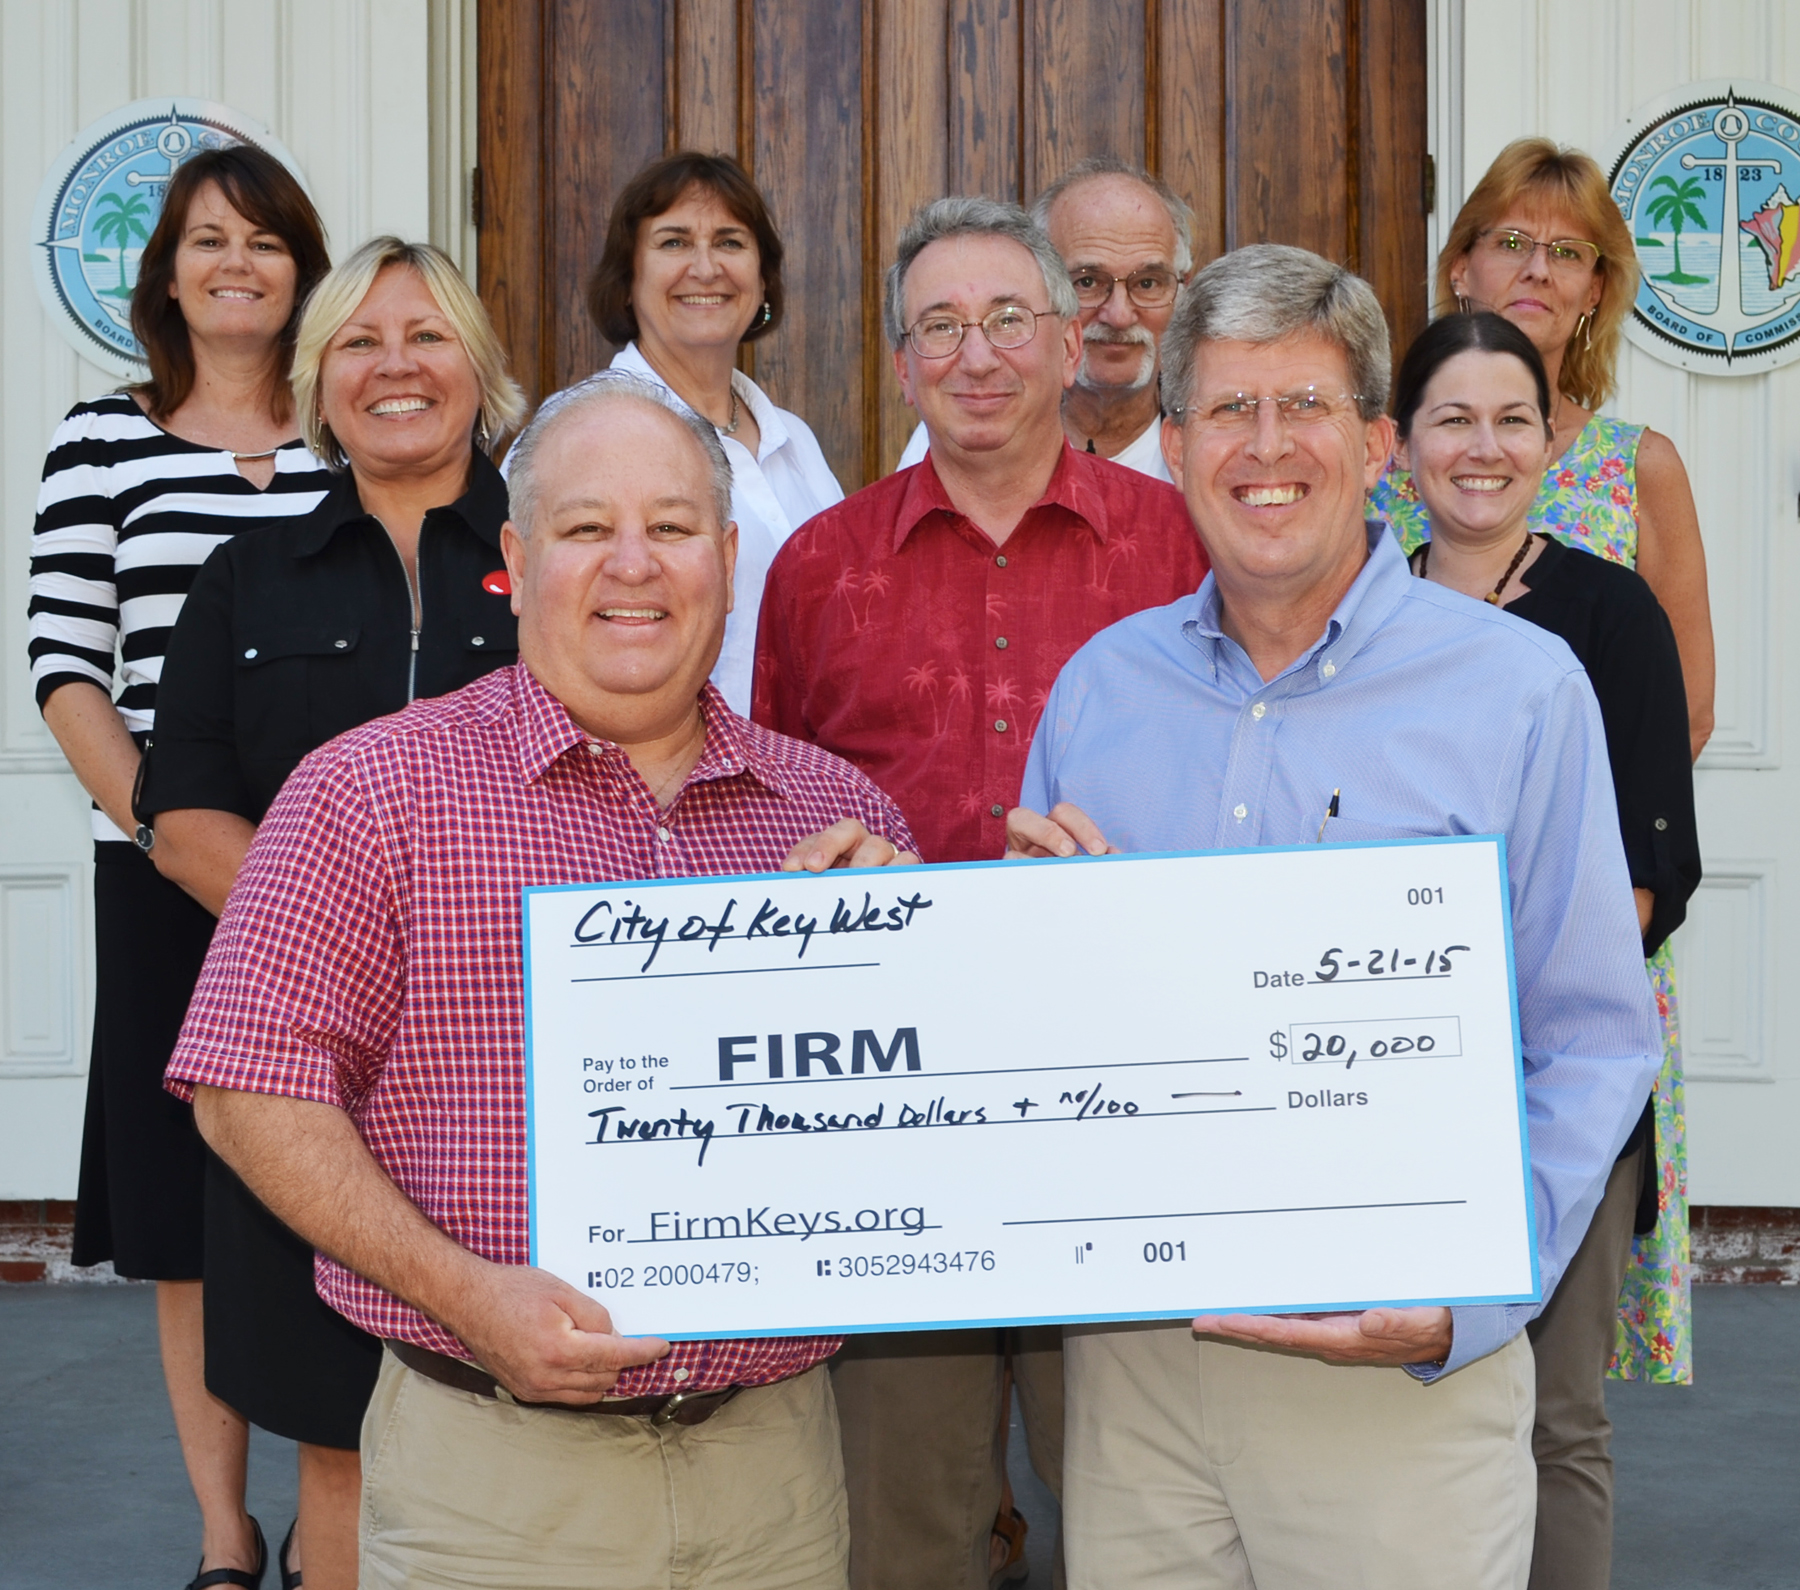 City Donates $20,000 to FIRM